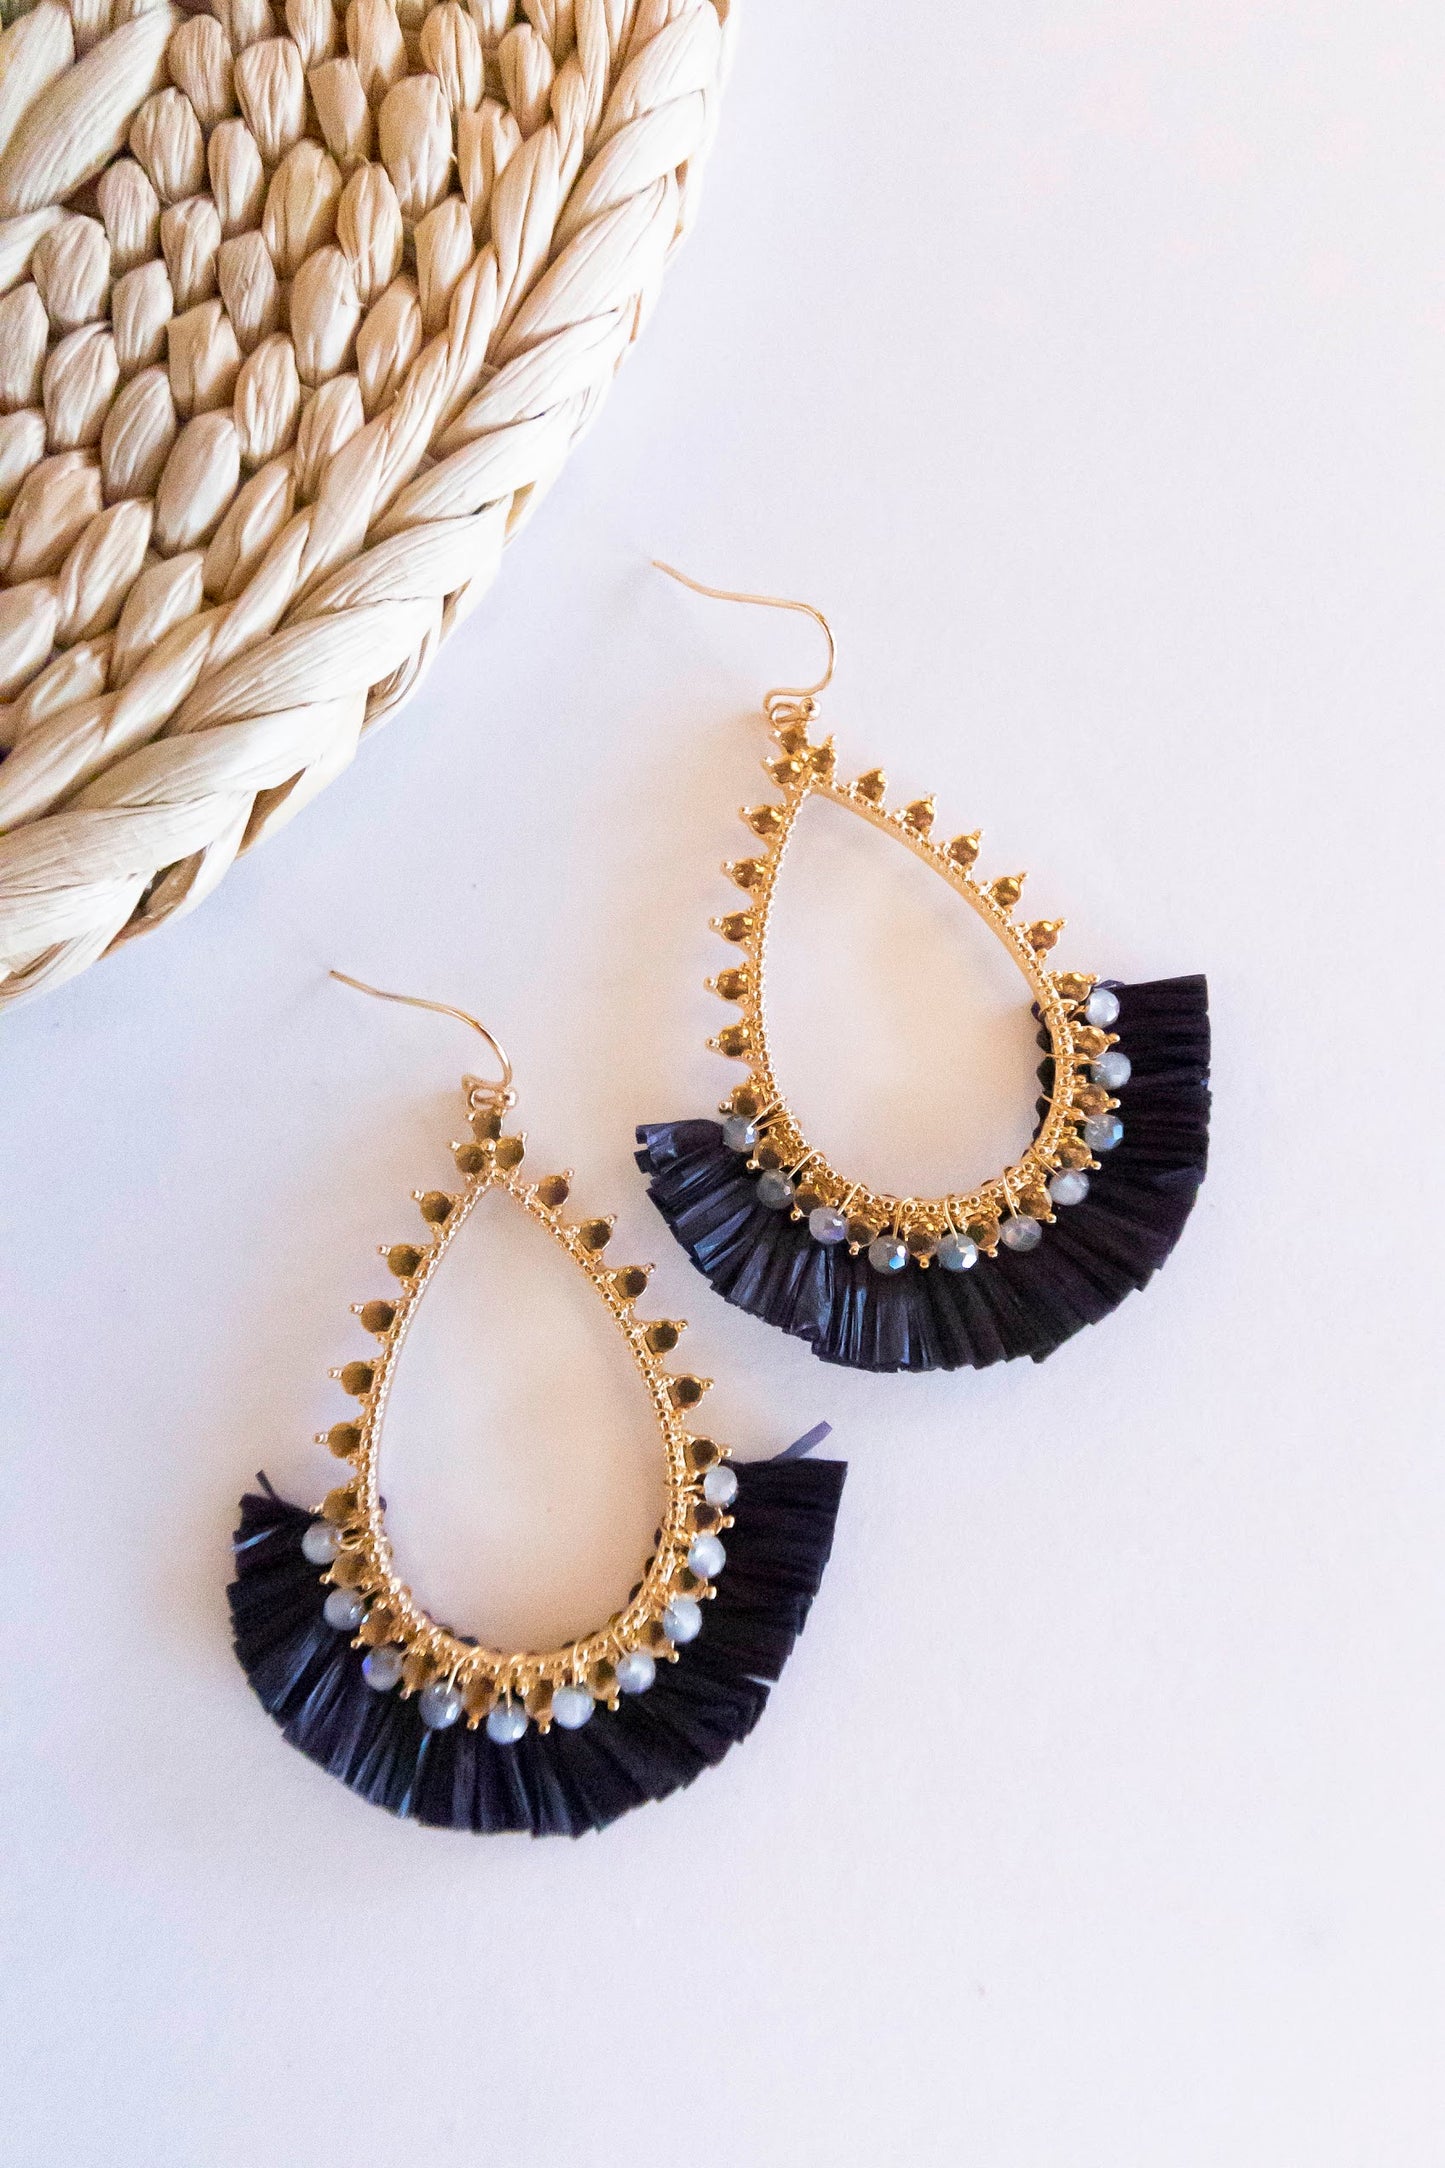 Marla Gold and Raffia Hoops | Teardrop Design With Crystal Details | Brushed Brass Autumn Earrings